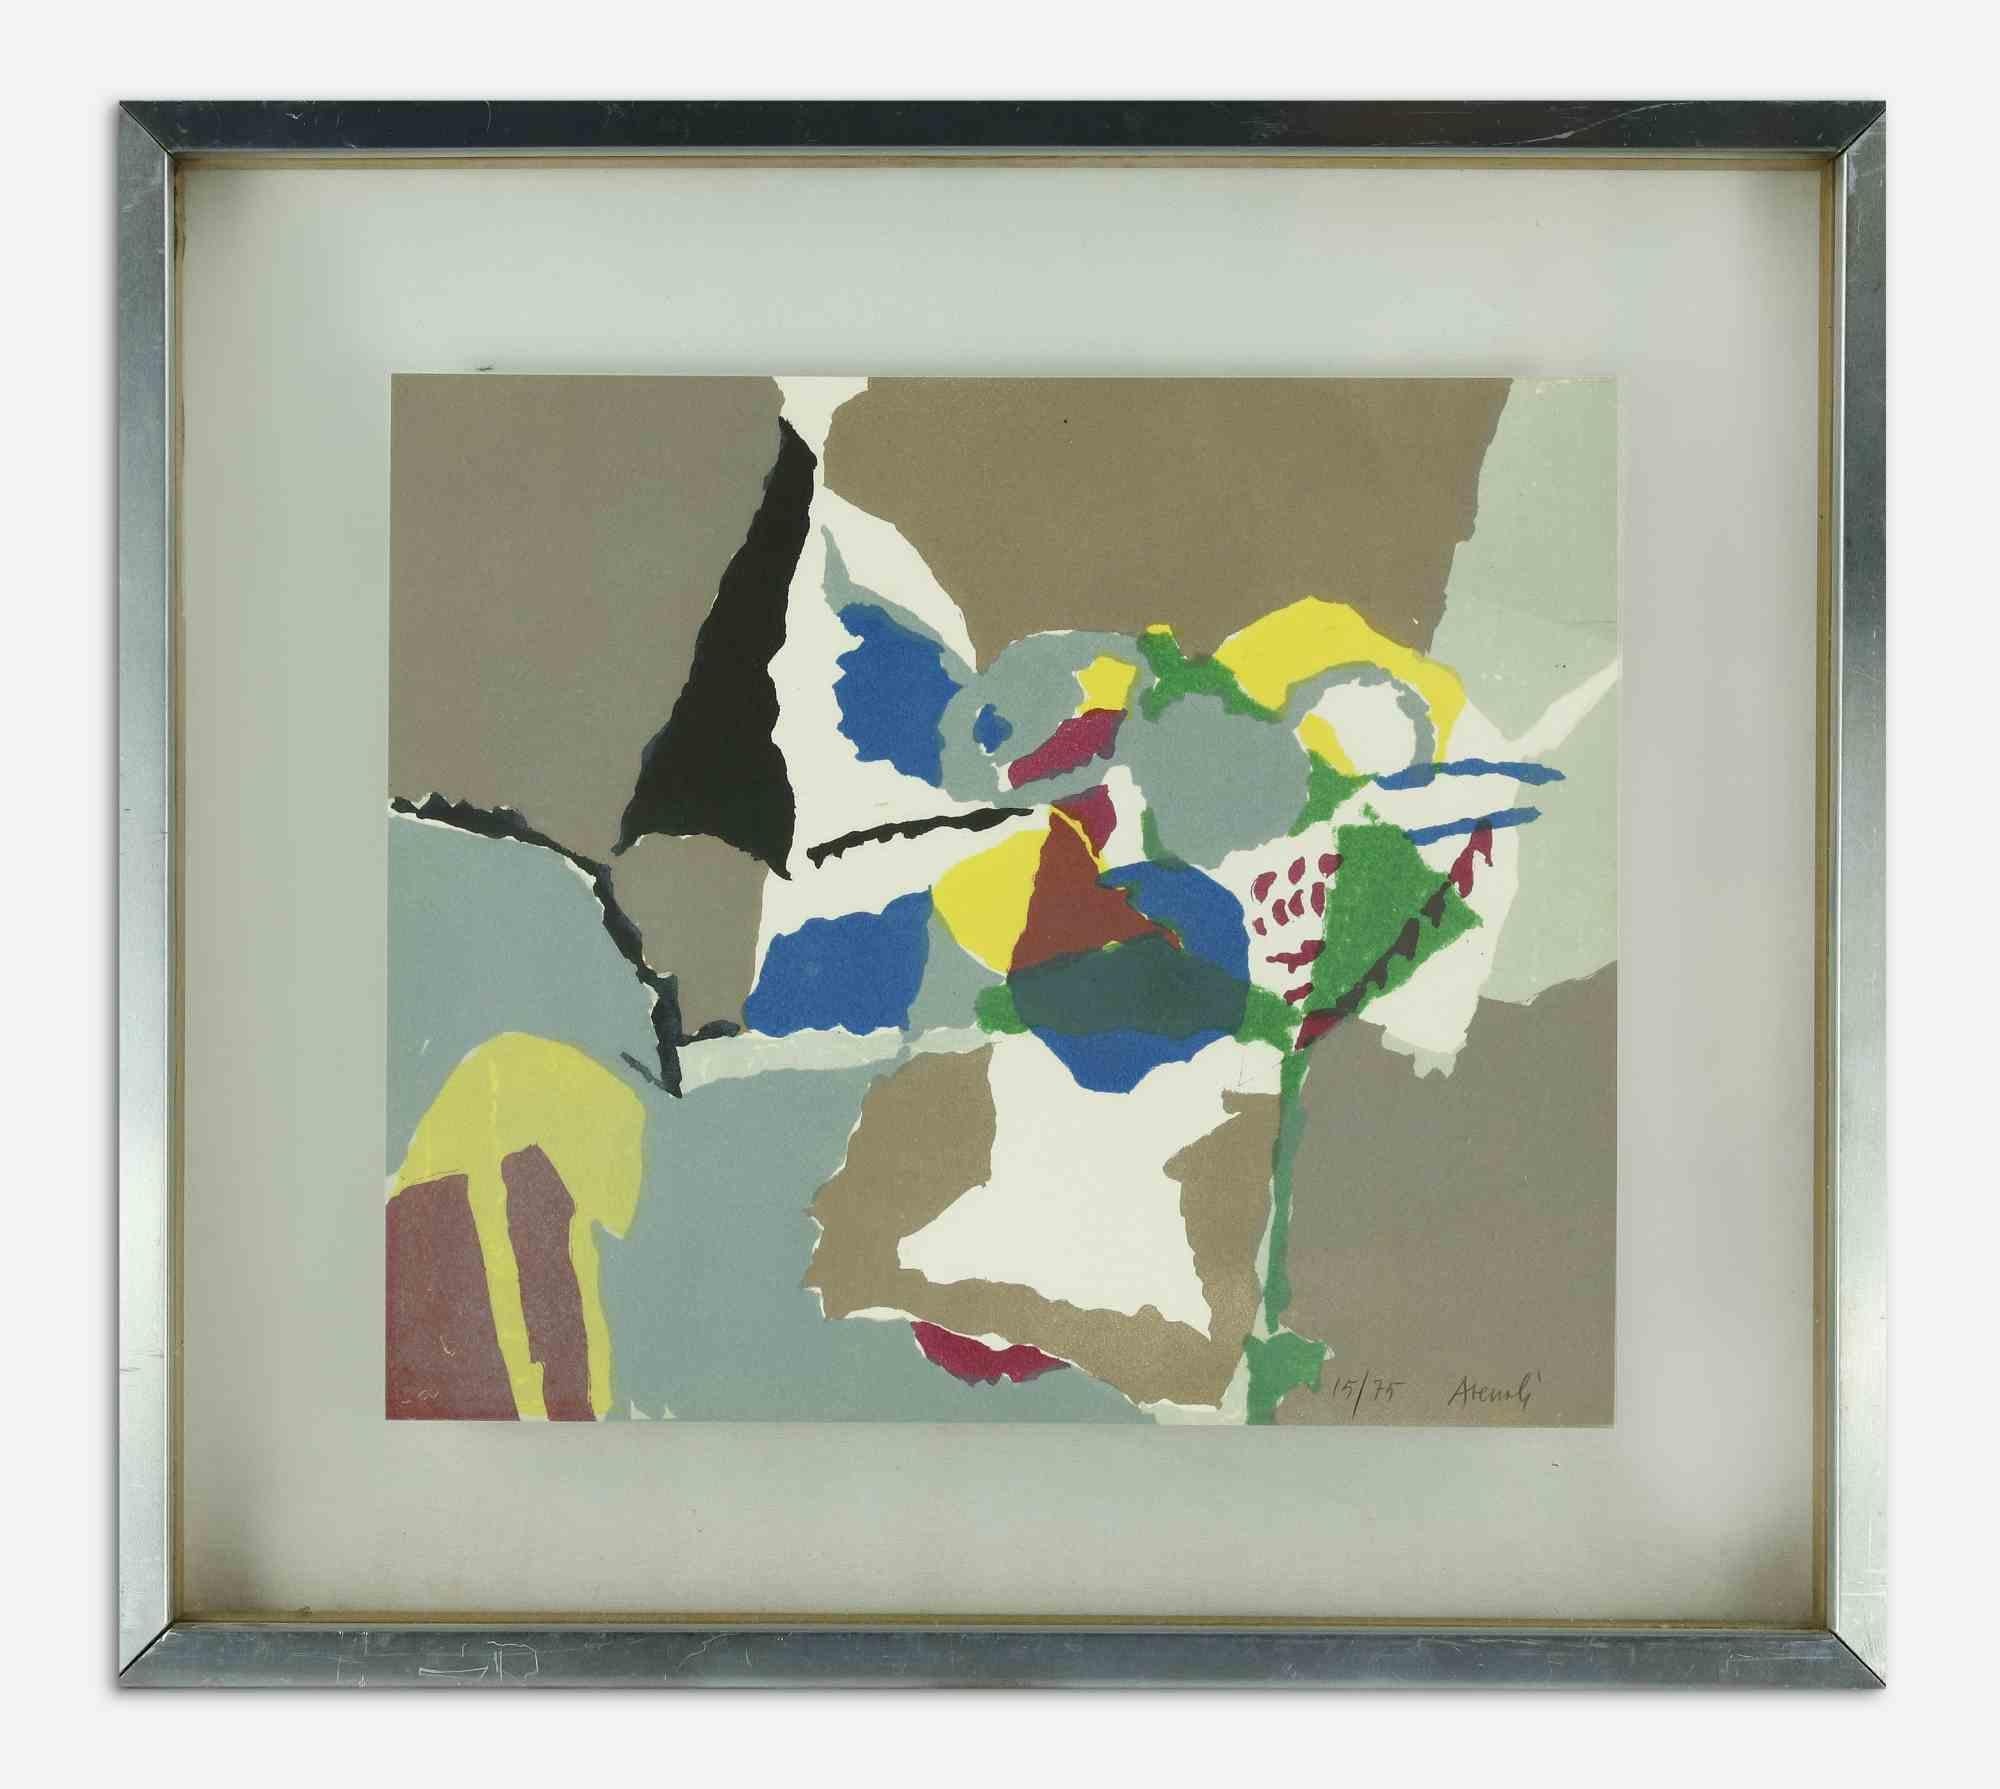 Marcello Venali Abstract Print - Untitled - Lithograph by Marcello Avenali - Mid-20th Century